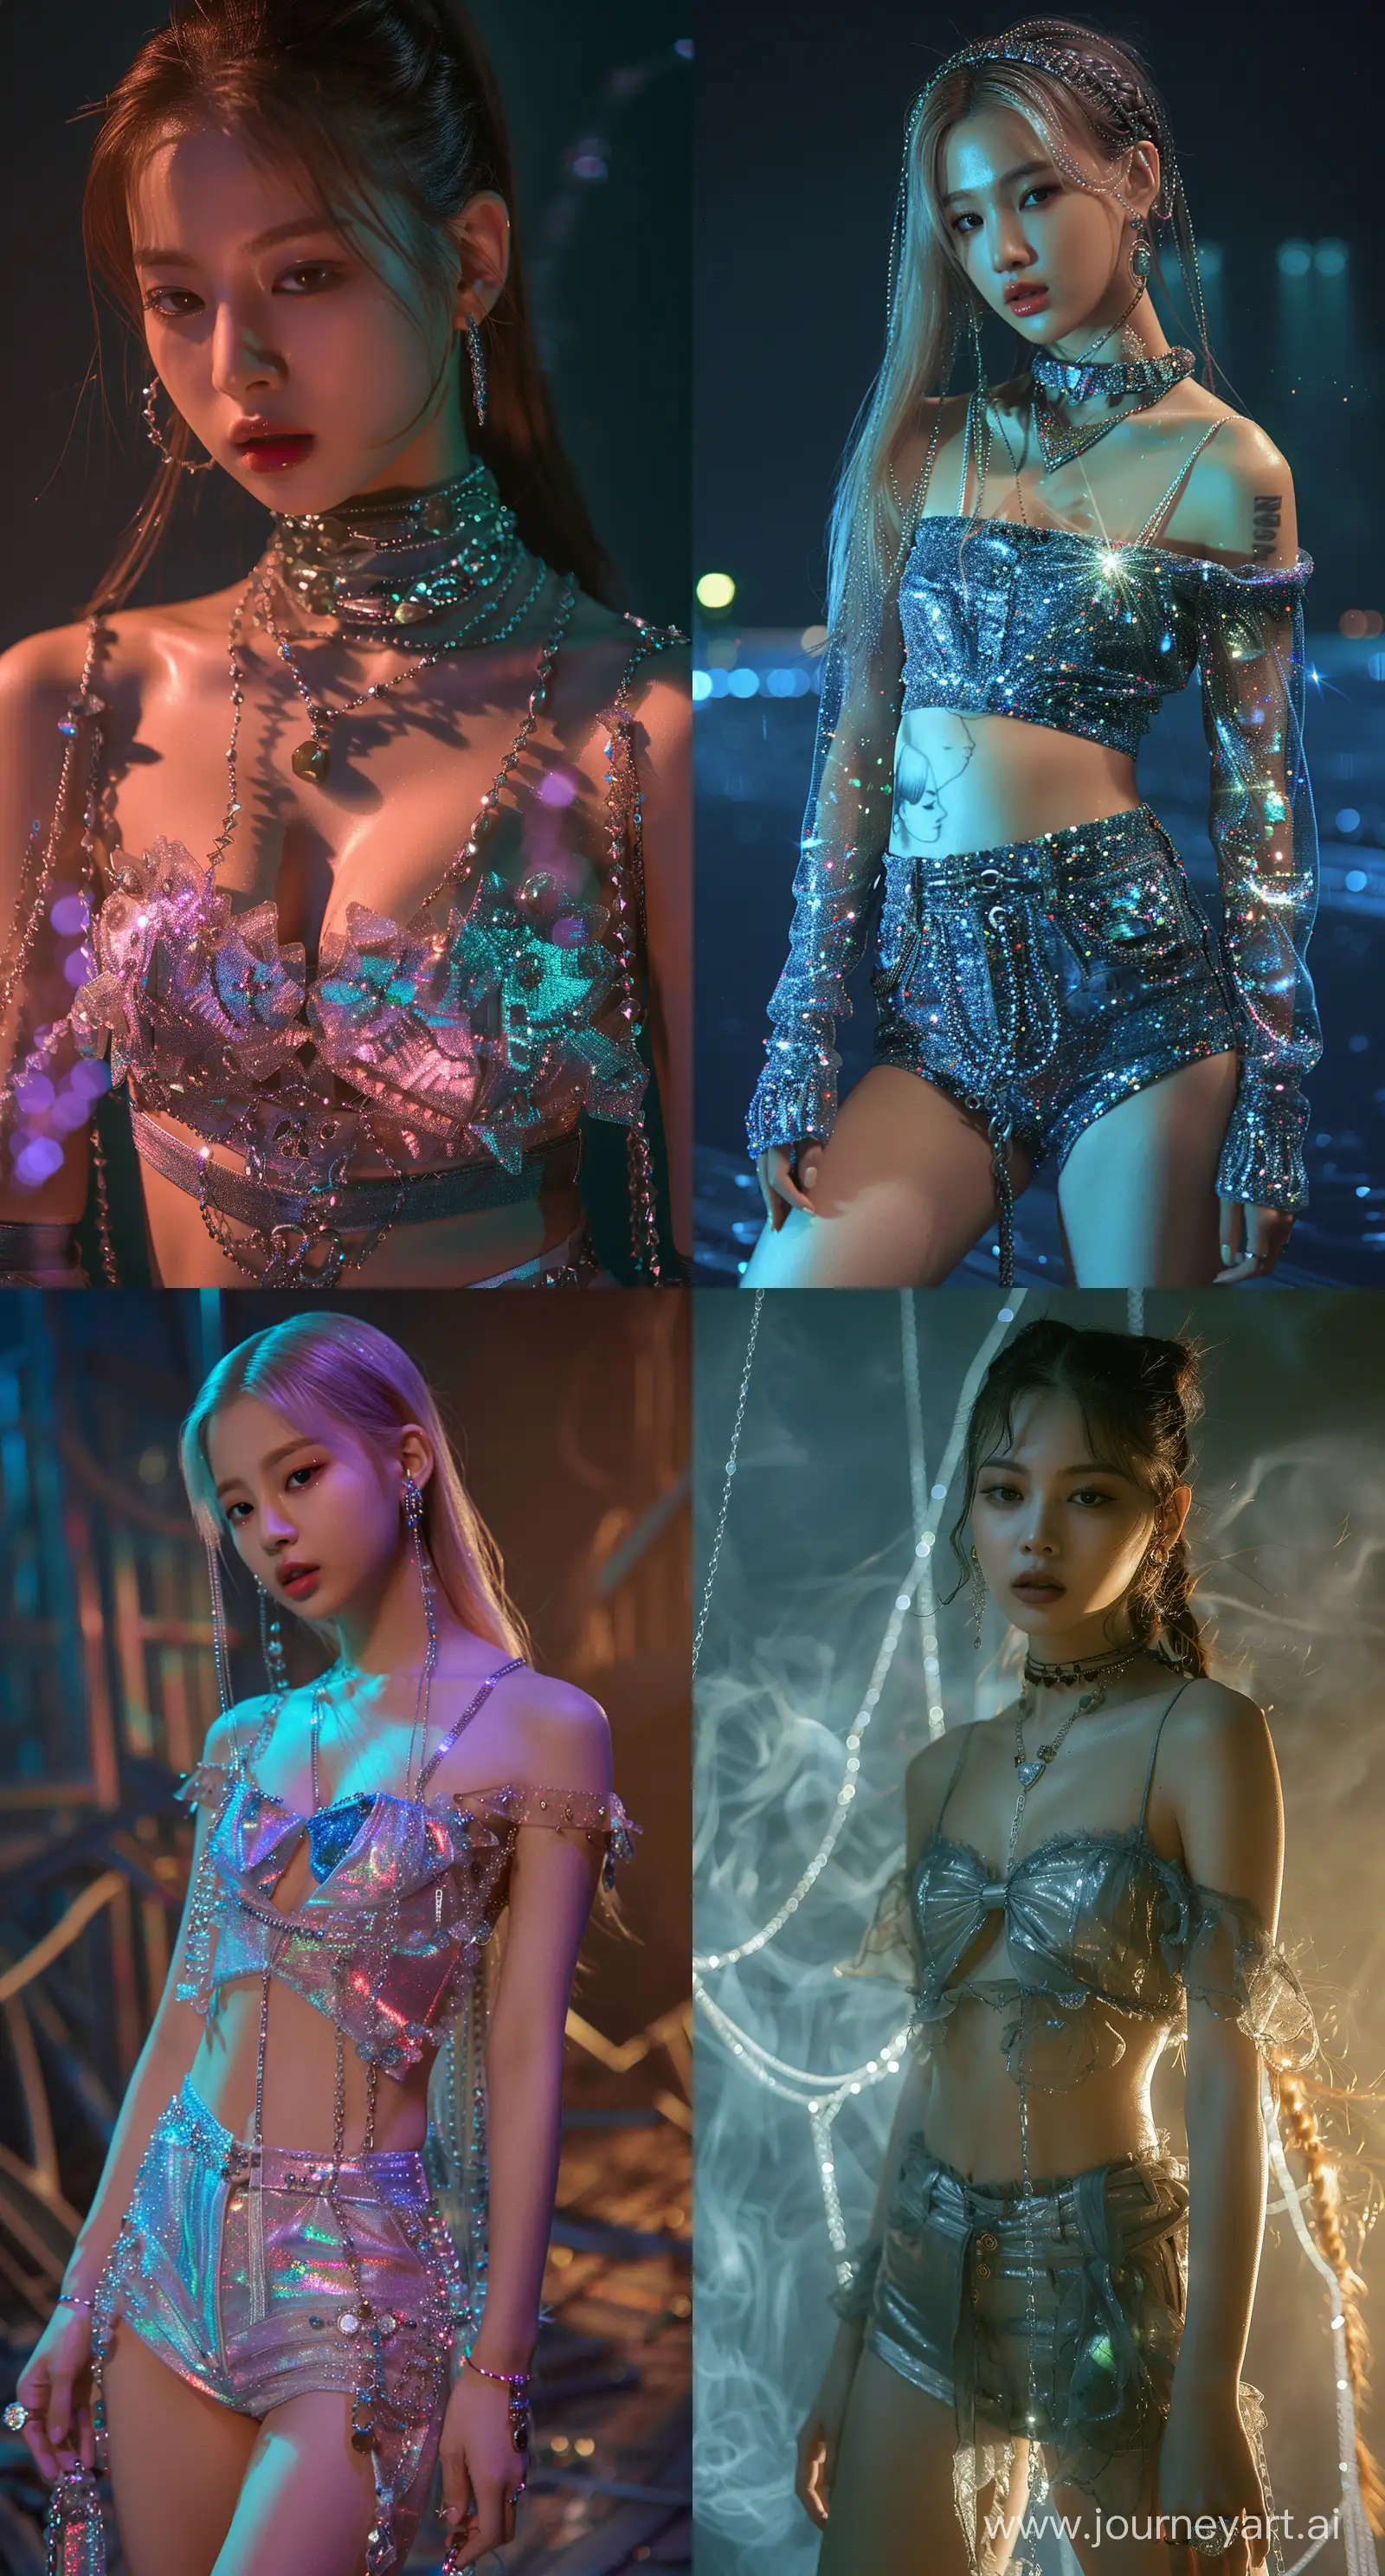 Jennie-Blackpink-in-Mystical-Labradorite-Crystal-Outfit-Nocturnal-Casual-Fashion